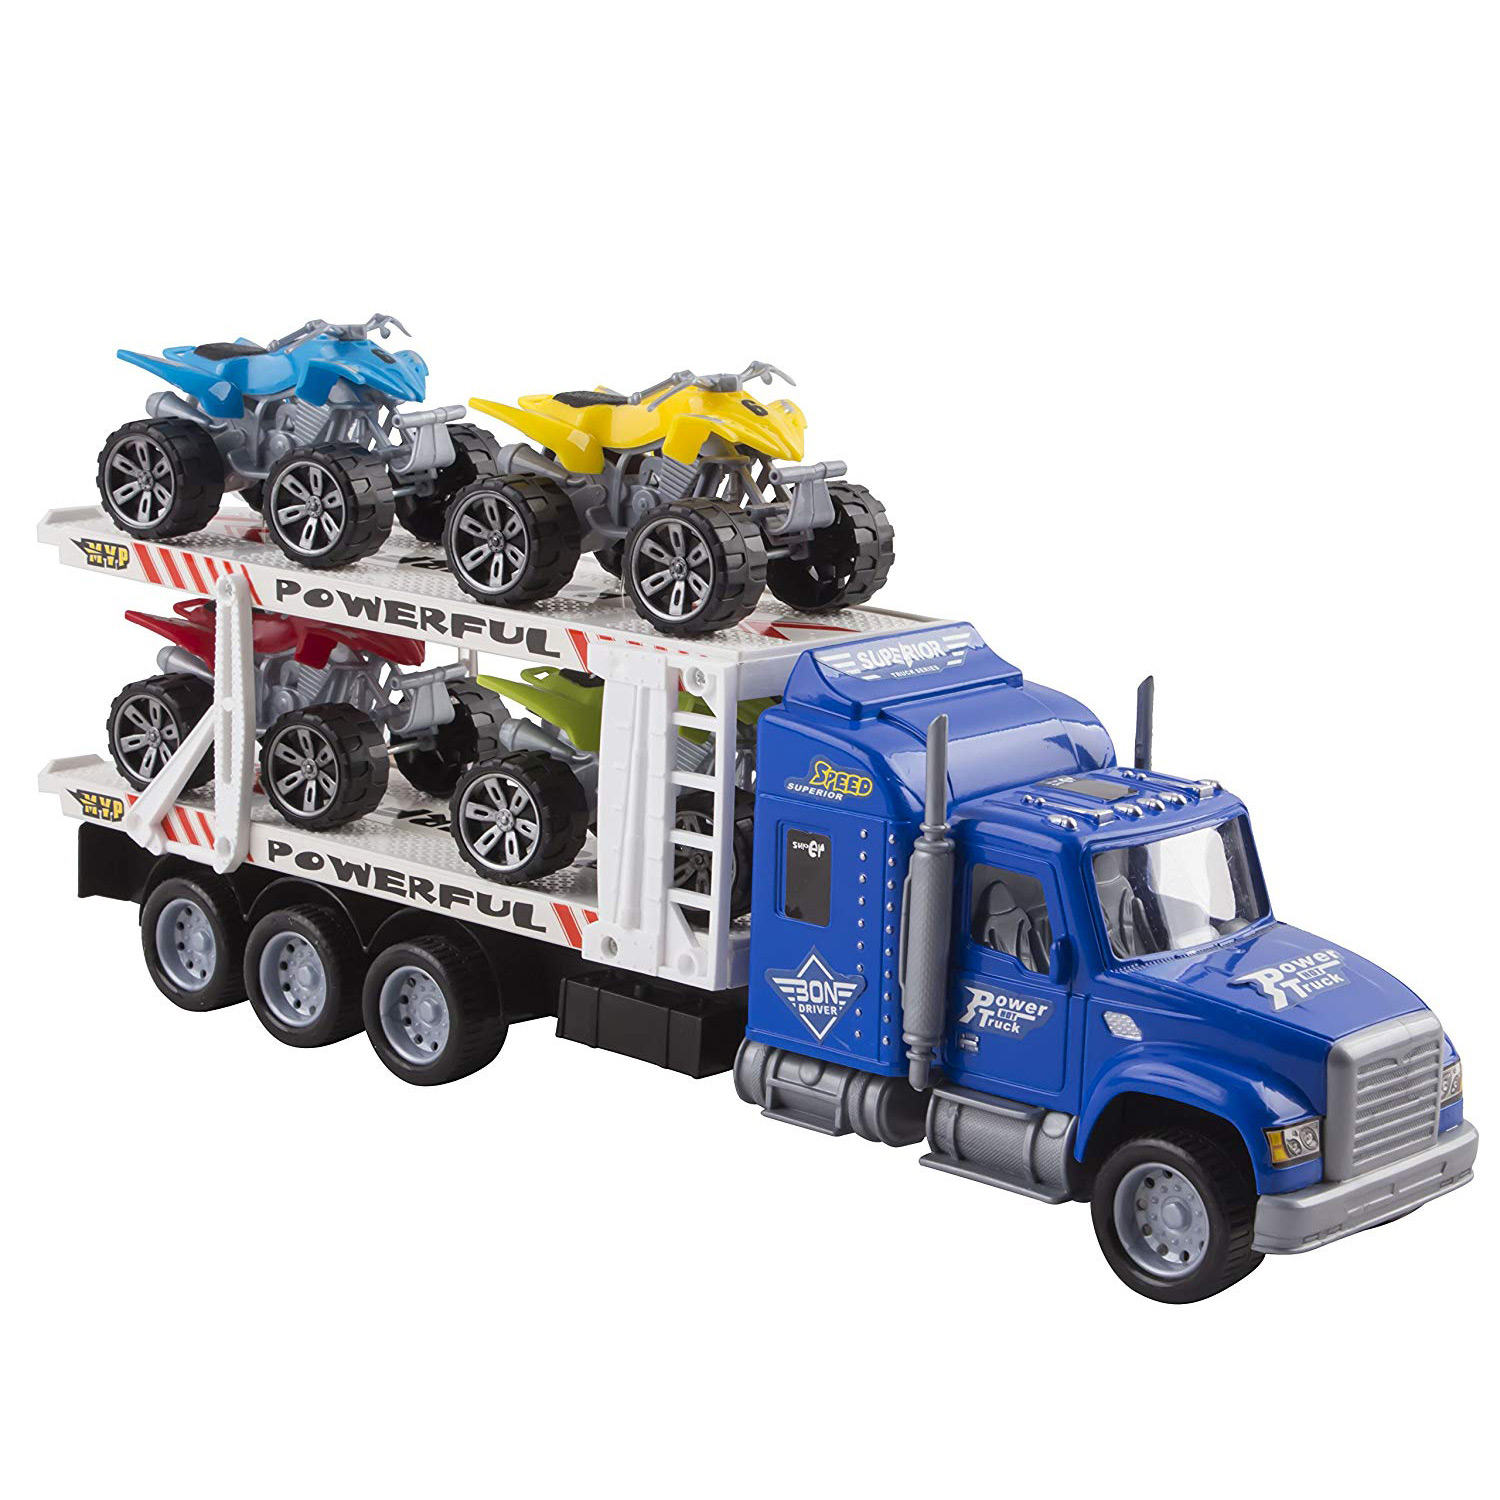 Toy Truck Transporter Trailer 14.5" Childrenâ€™s Friction Big Rig With 4 ATV Toys No Batteries Or Assembly Required Perfect Semi Truck For Kids (Blue Truck)